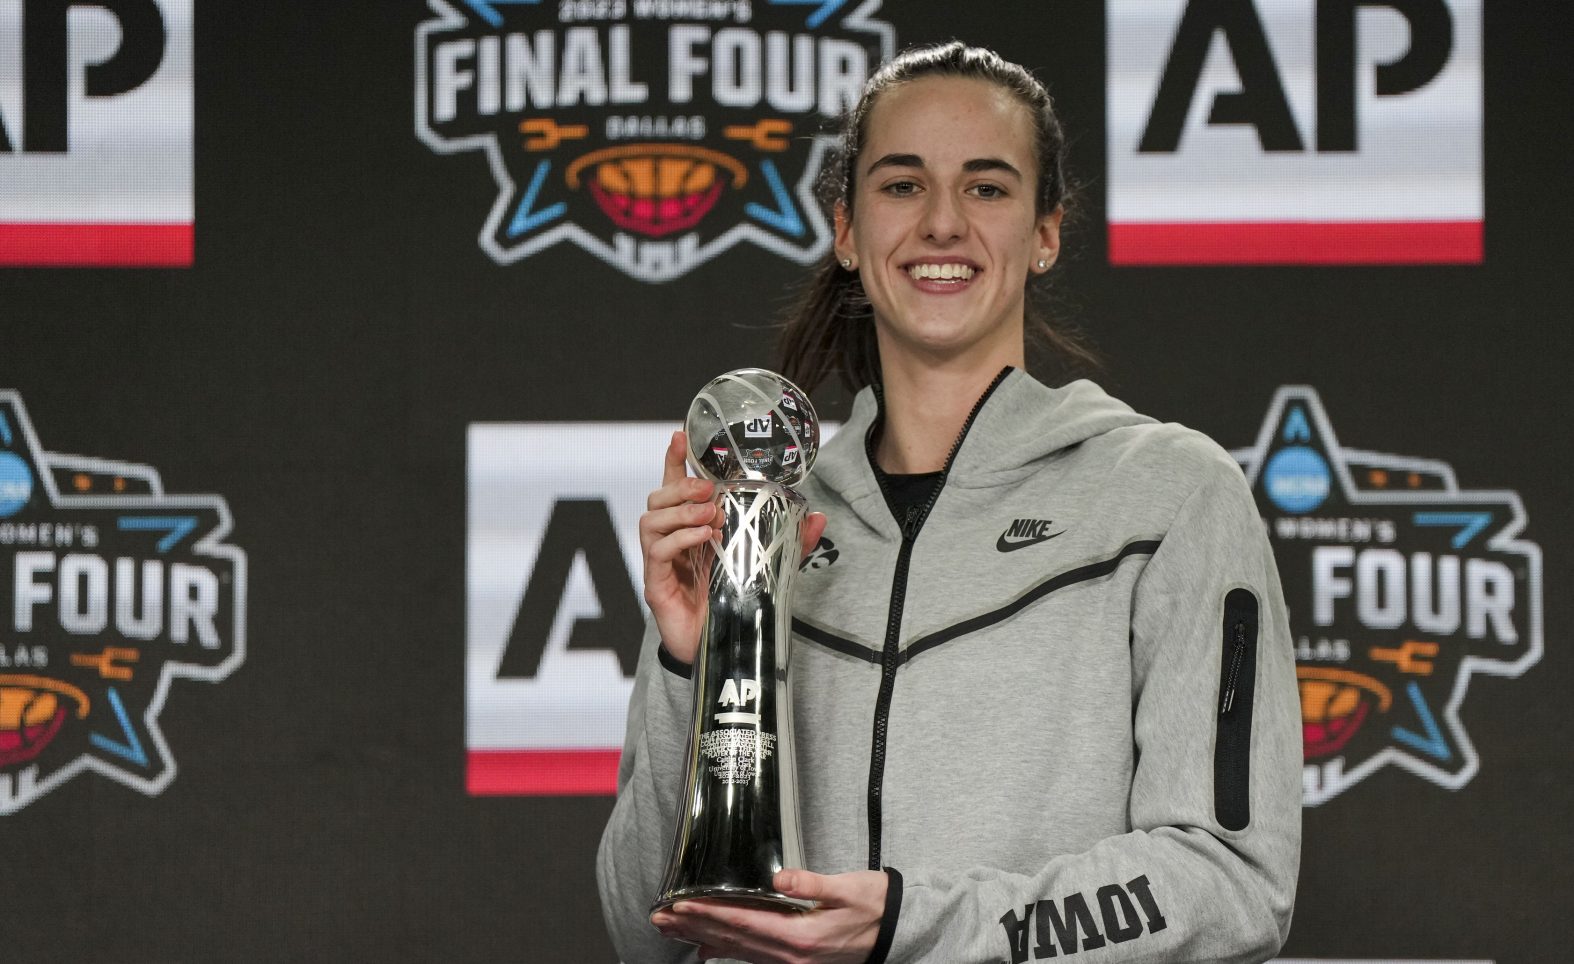 J-Bo & Jared: Iowa women’s run to the Final Four, previewing the men’s Final Four and more